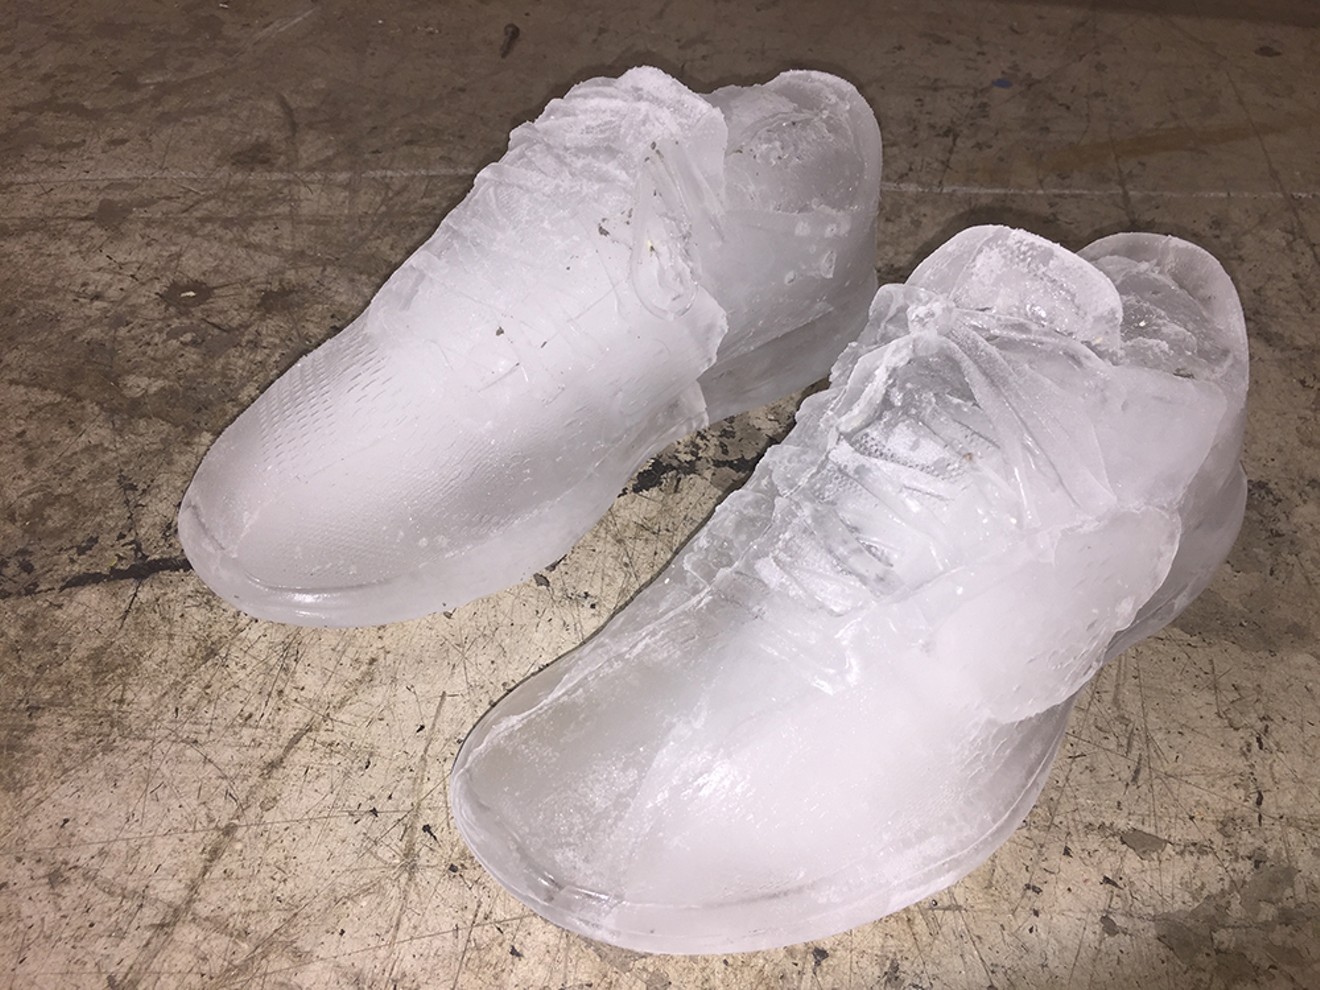 The artist's shoes cast in ice, 2019.